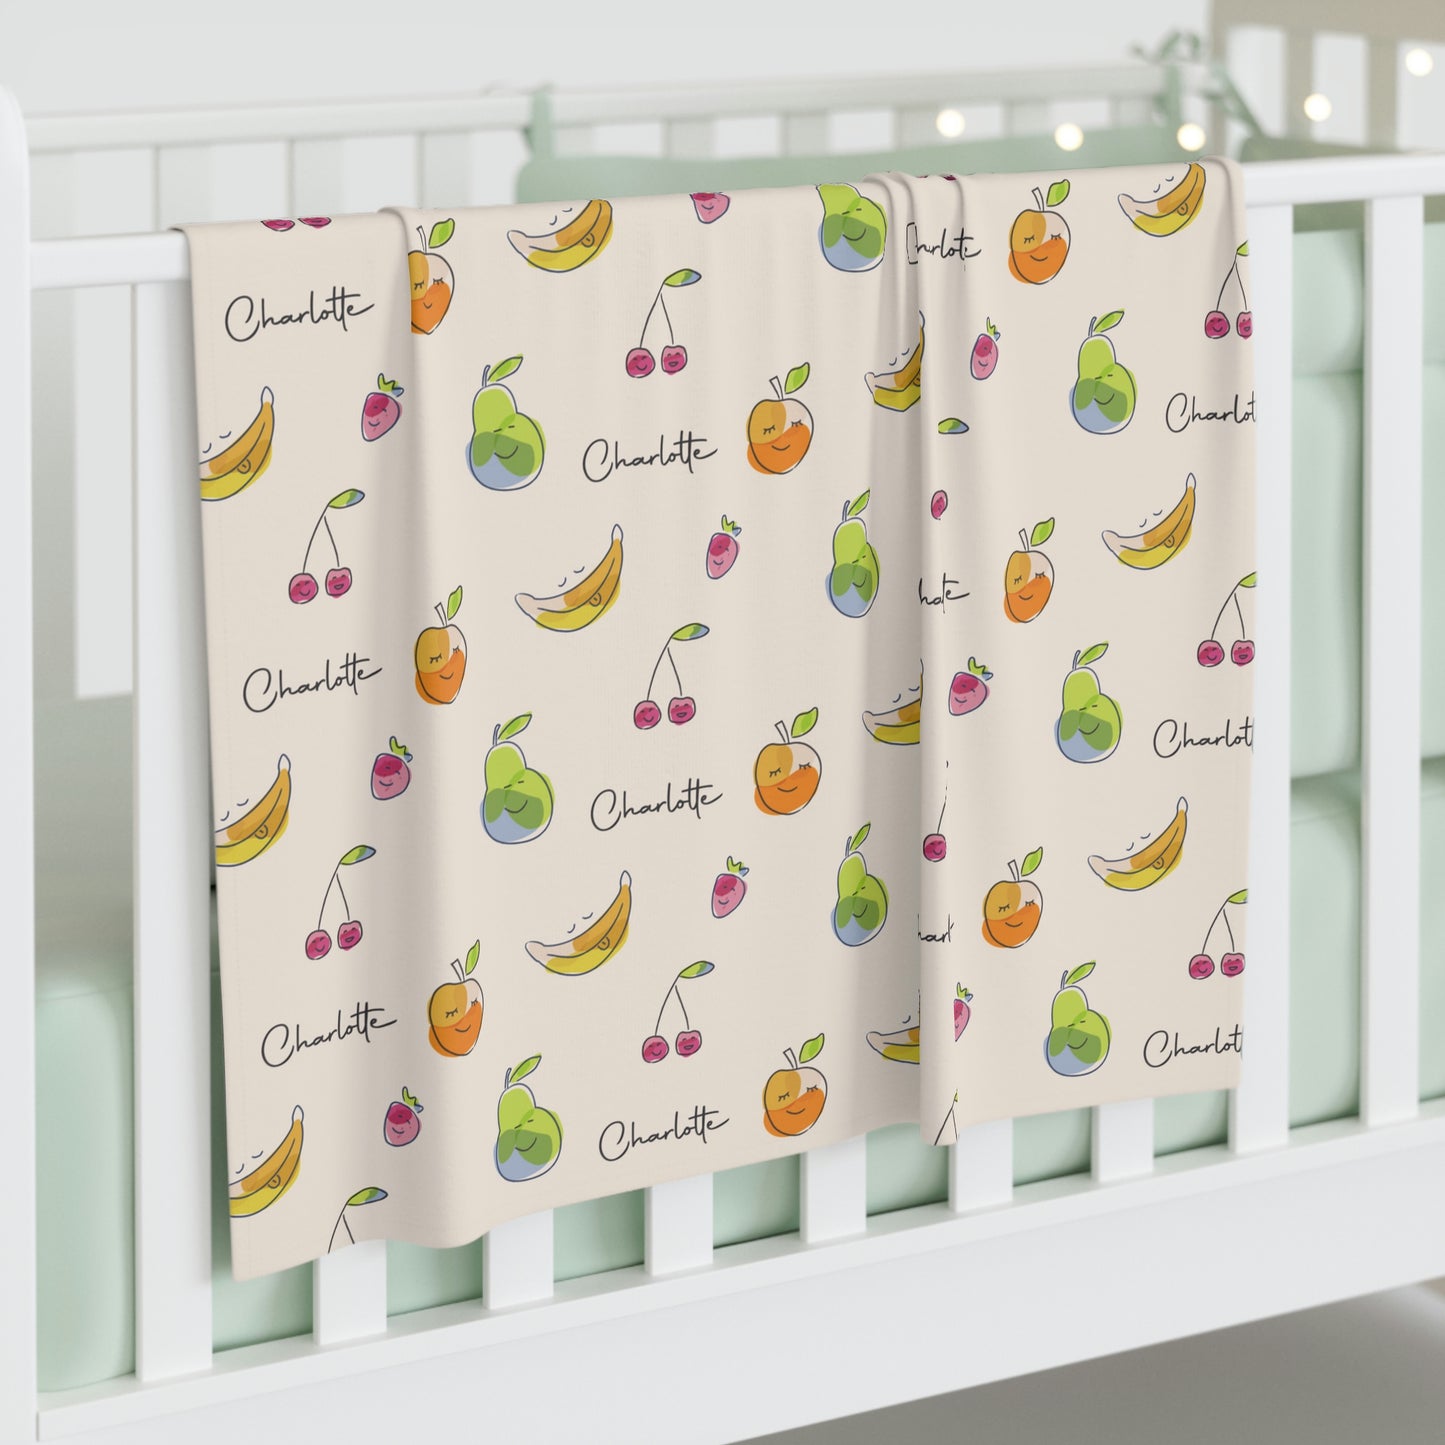 Jersey personalized baby blanket in happy fruit pattern hung over side of white crib